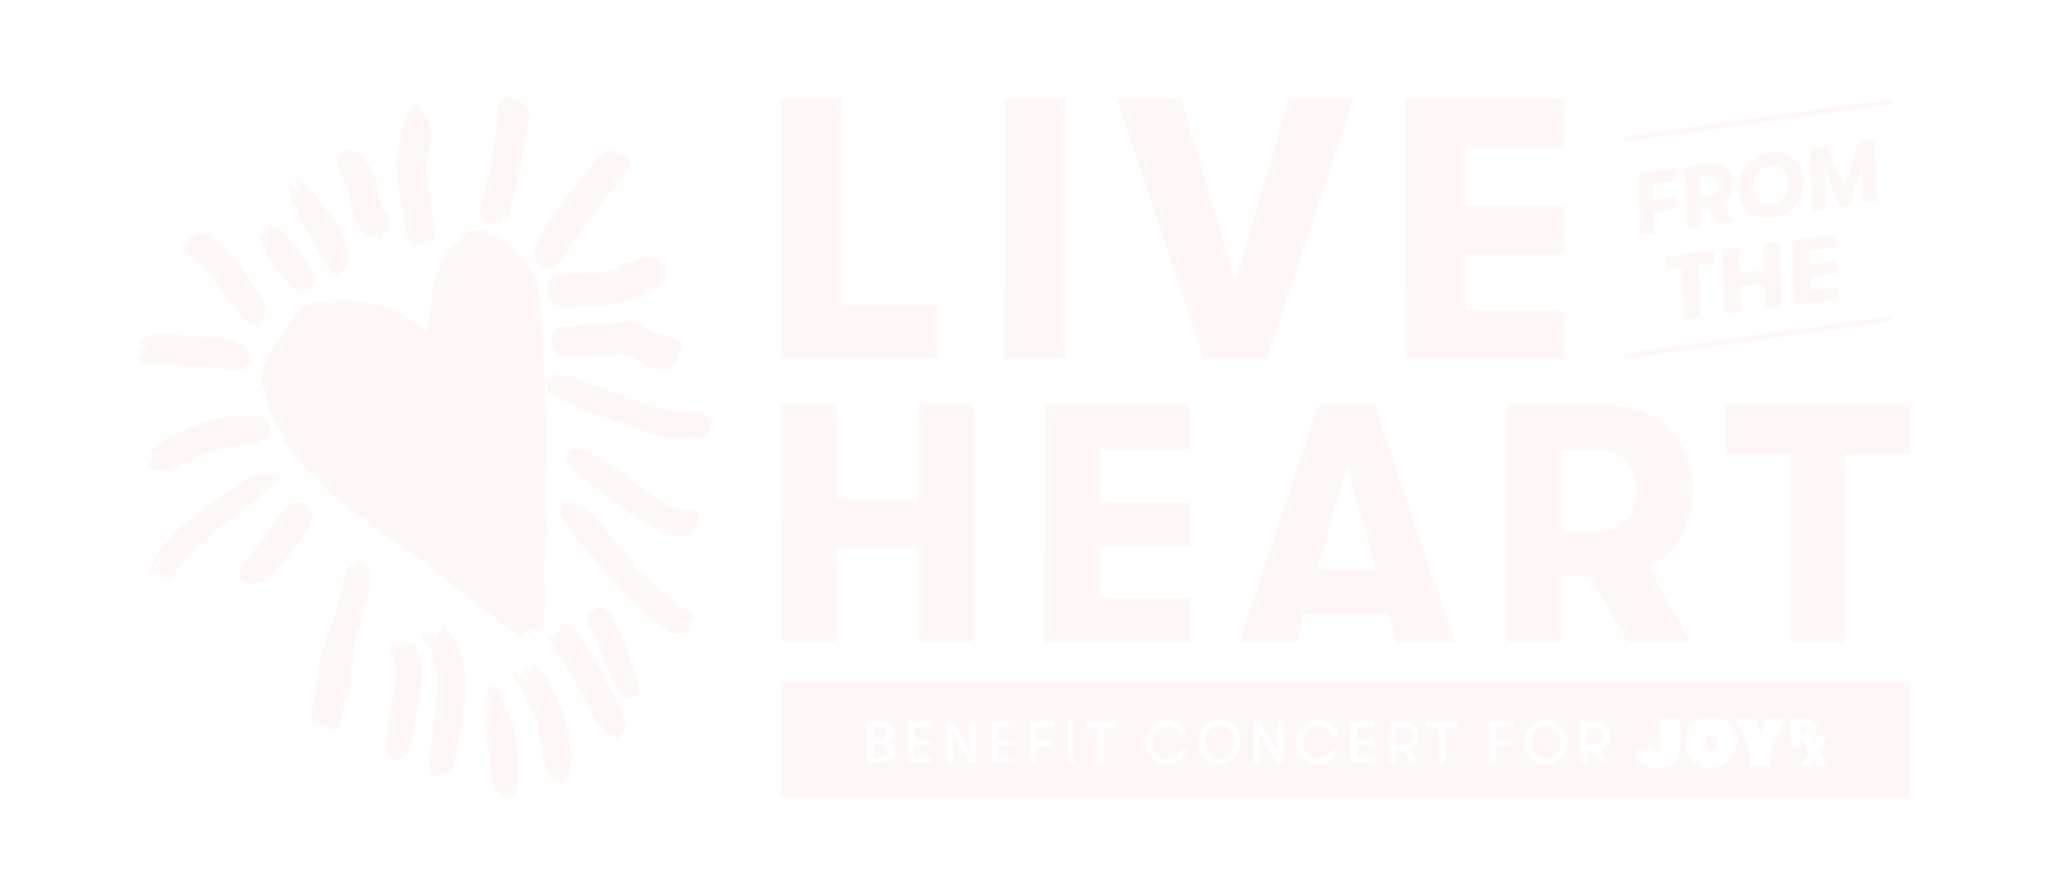 Live From the Heart benefit concert for JoyRx